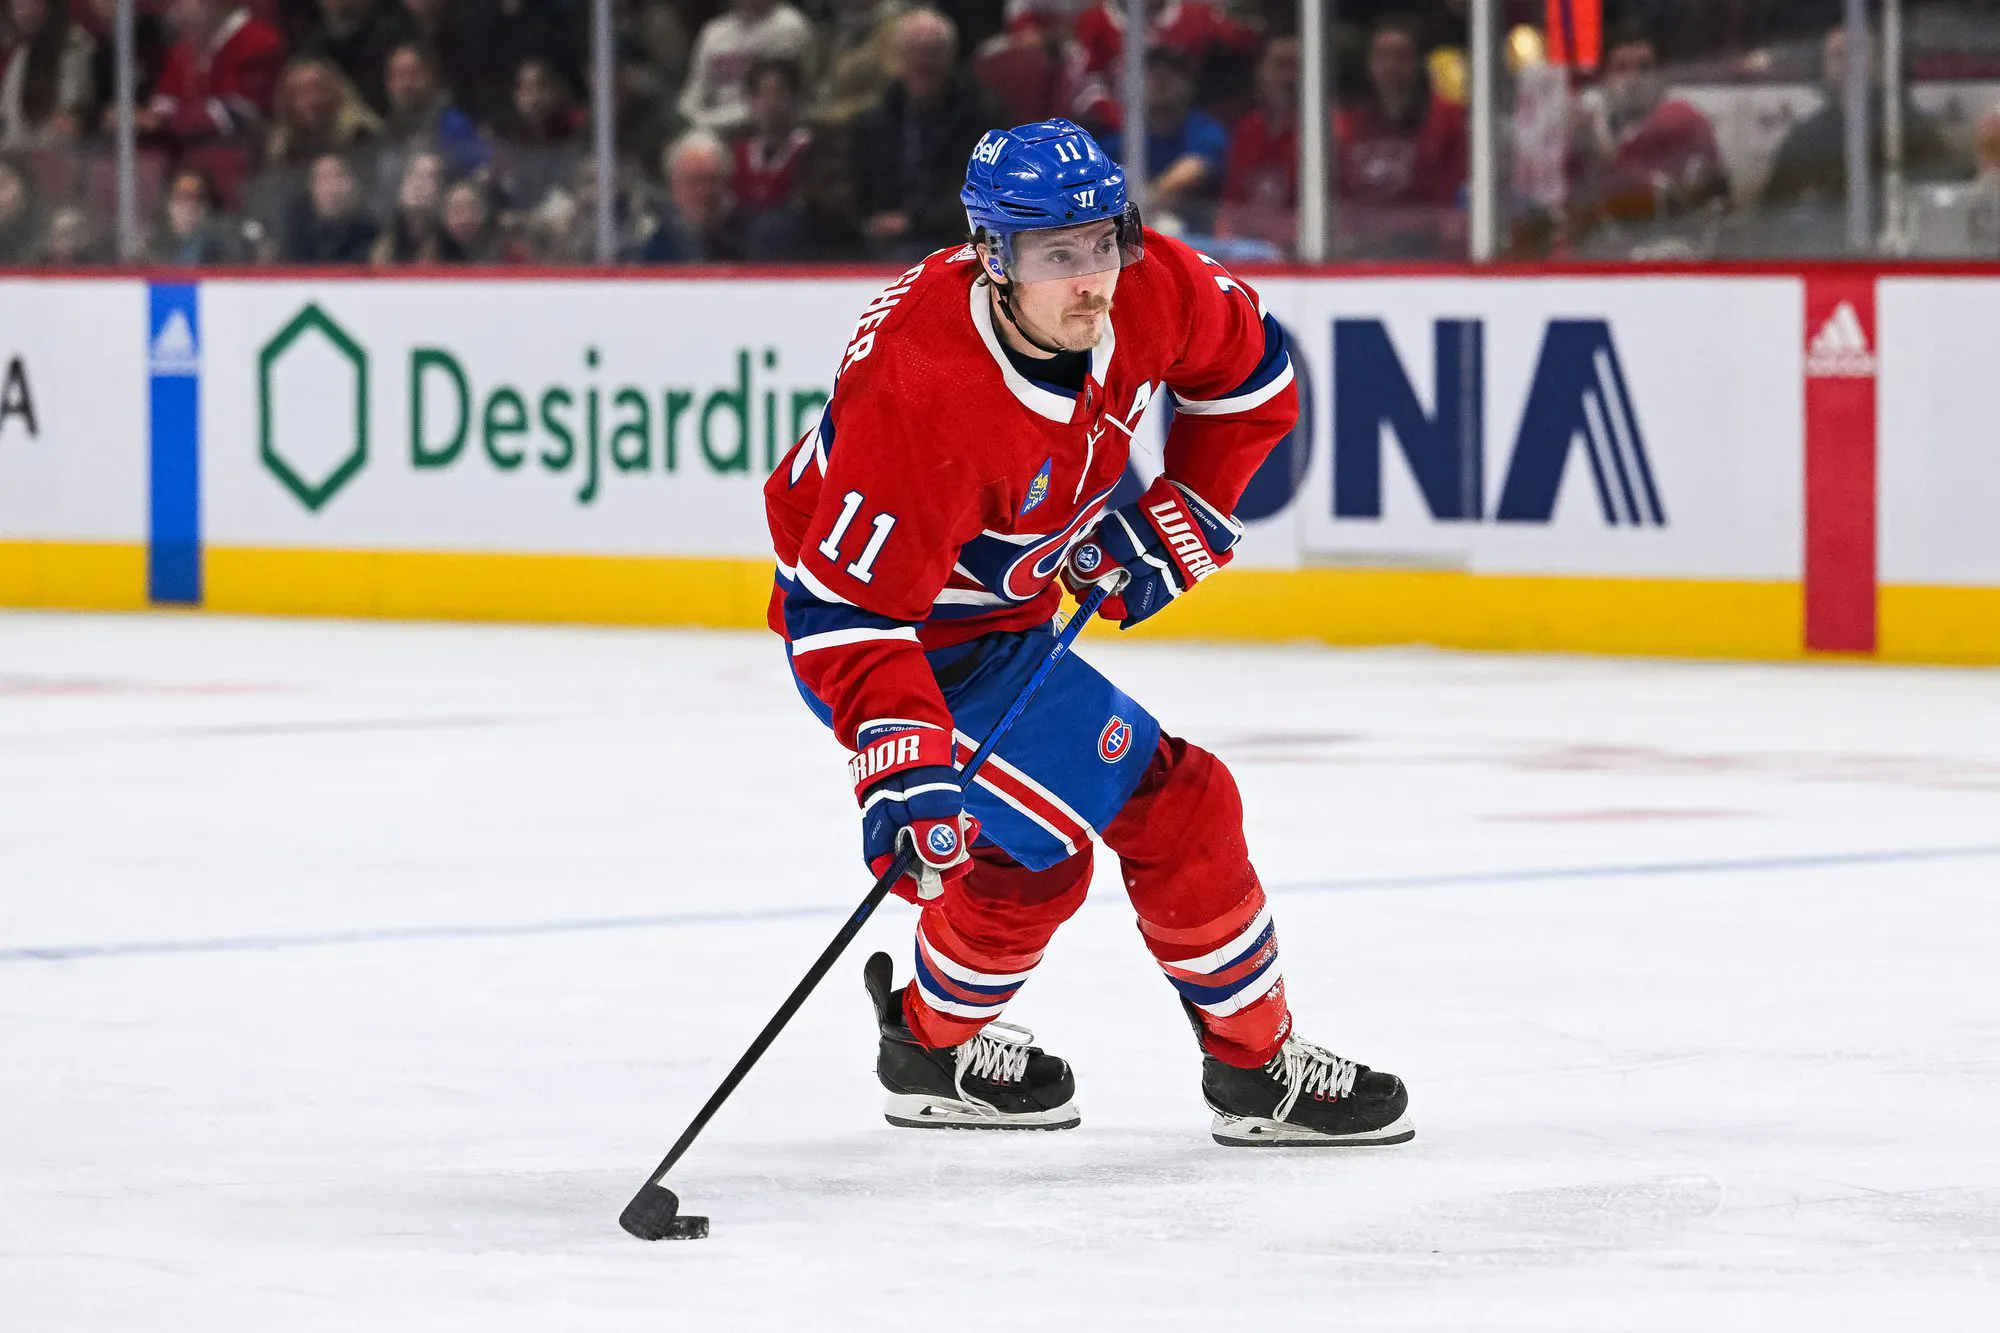 Montreal Canadiens forward Brendan Gallagher to miss at least six weeks with lower-body injury